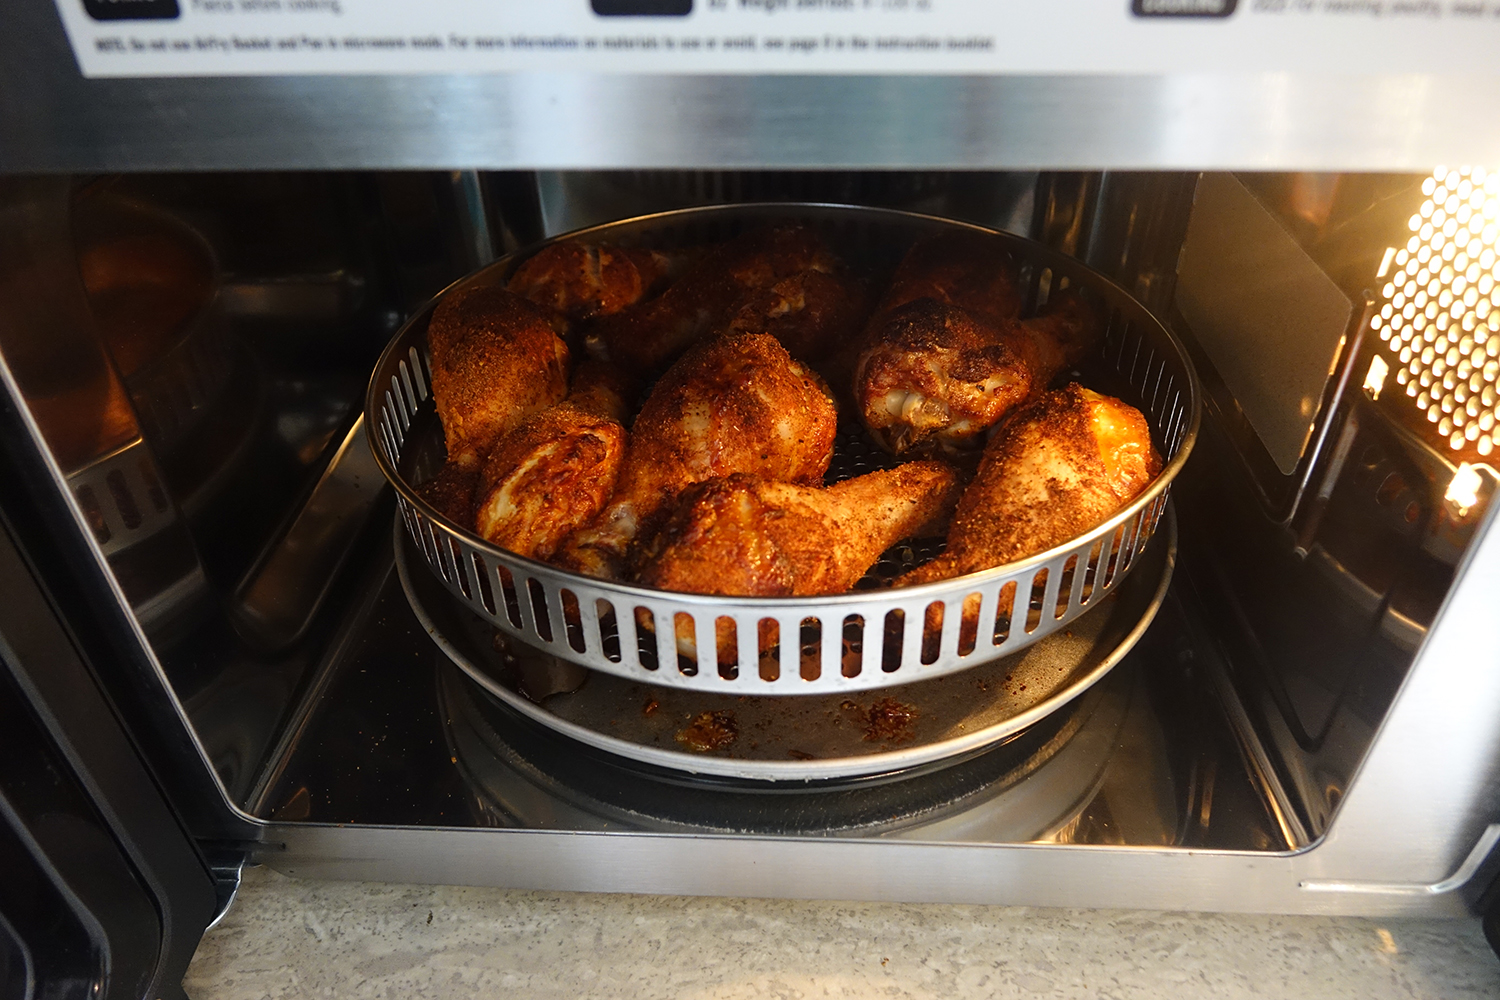 I Tried the 3 in 1 Microwave, Oven, and Air Fryer & Here's My Thoughts